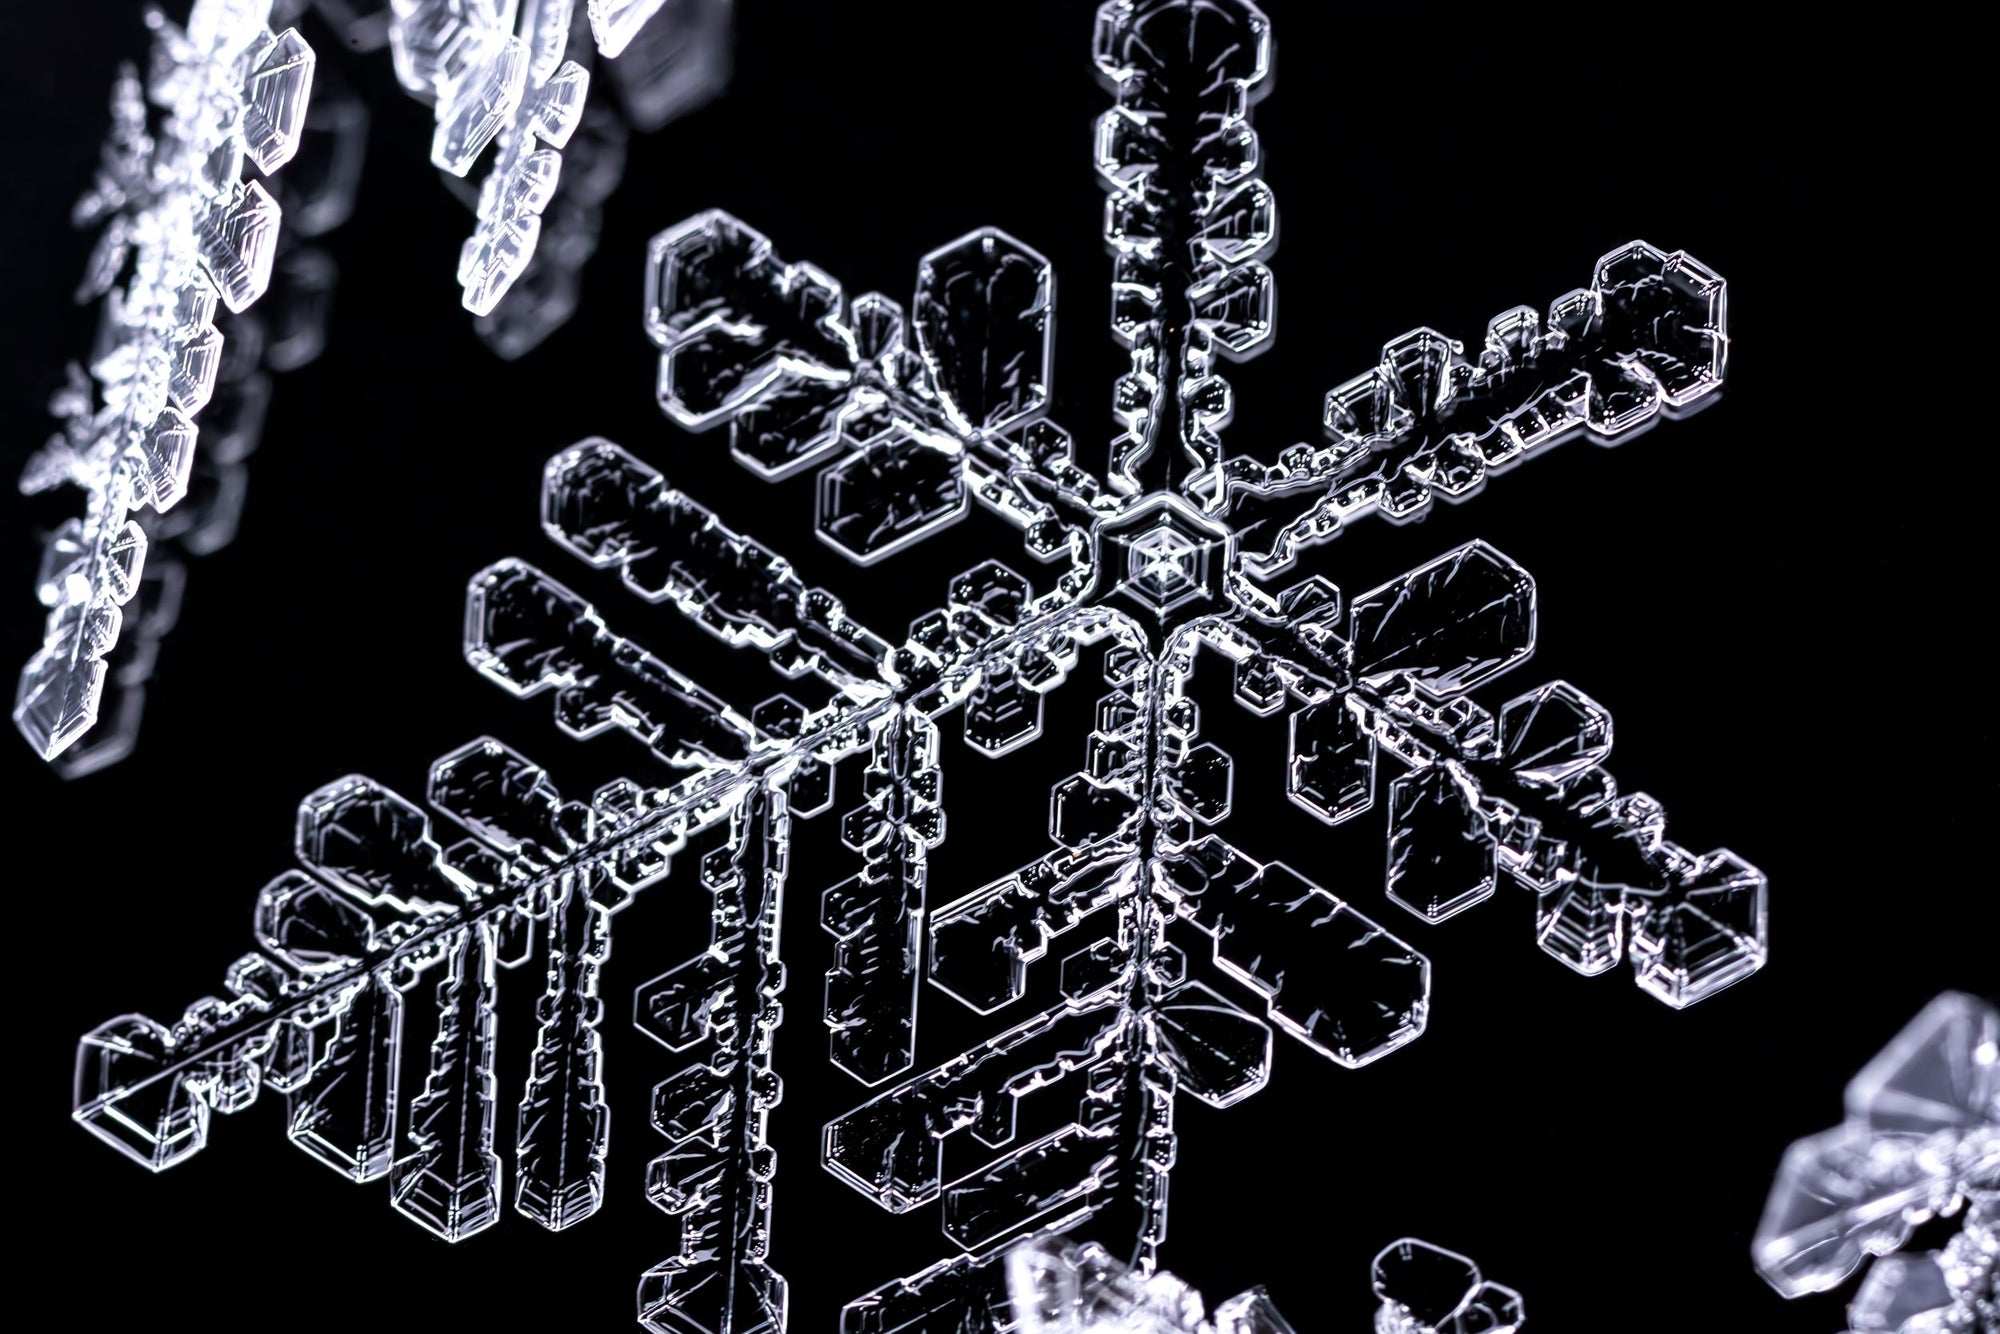 Crystal clear snowflakes captured under a microscopic lens against a black backdrop.